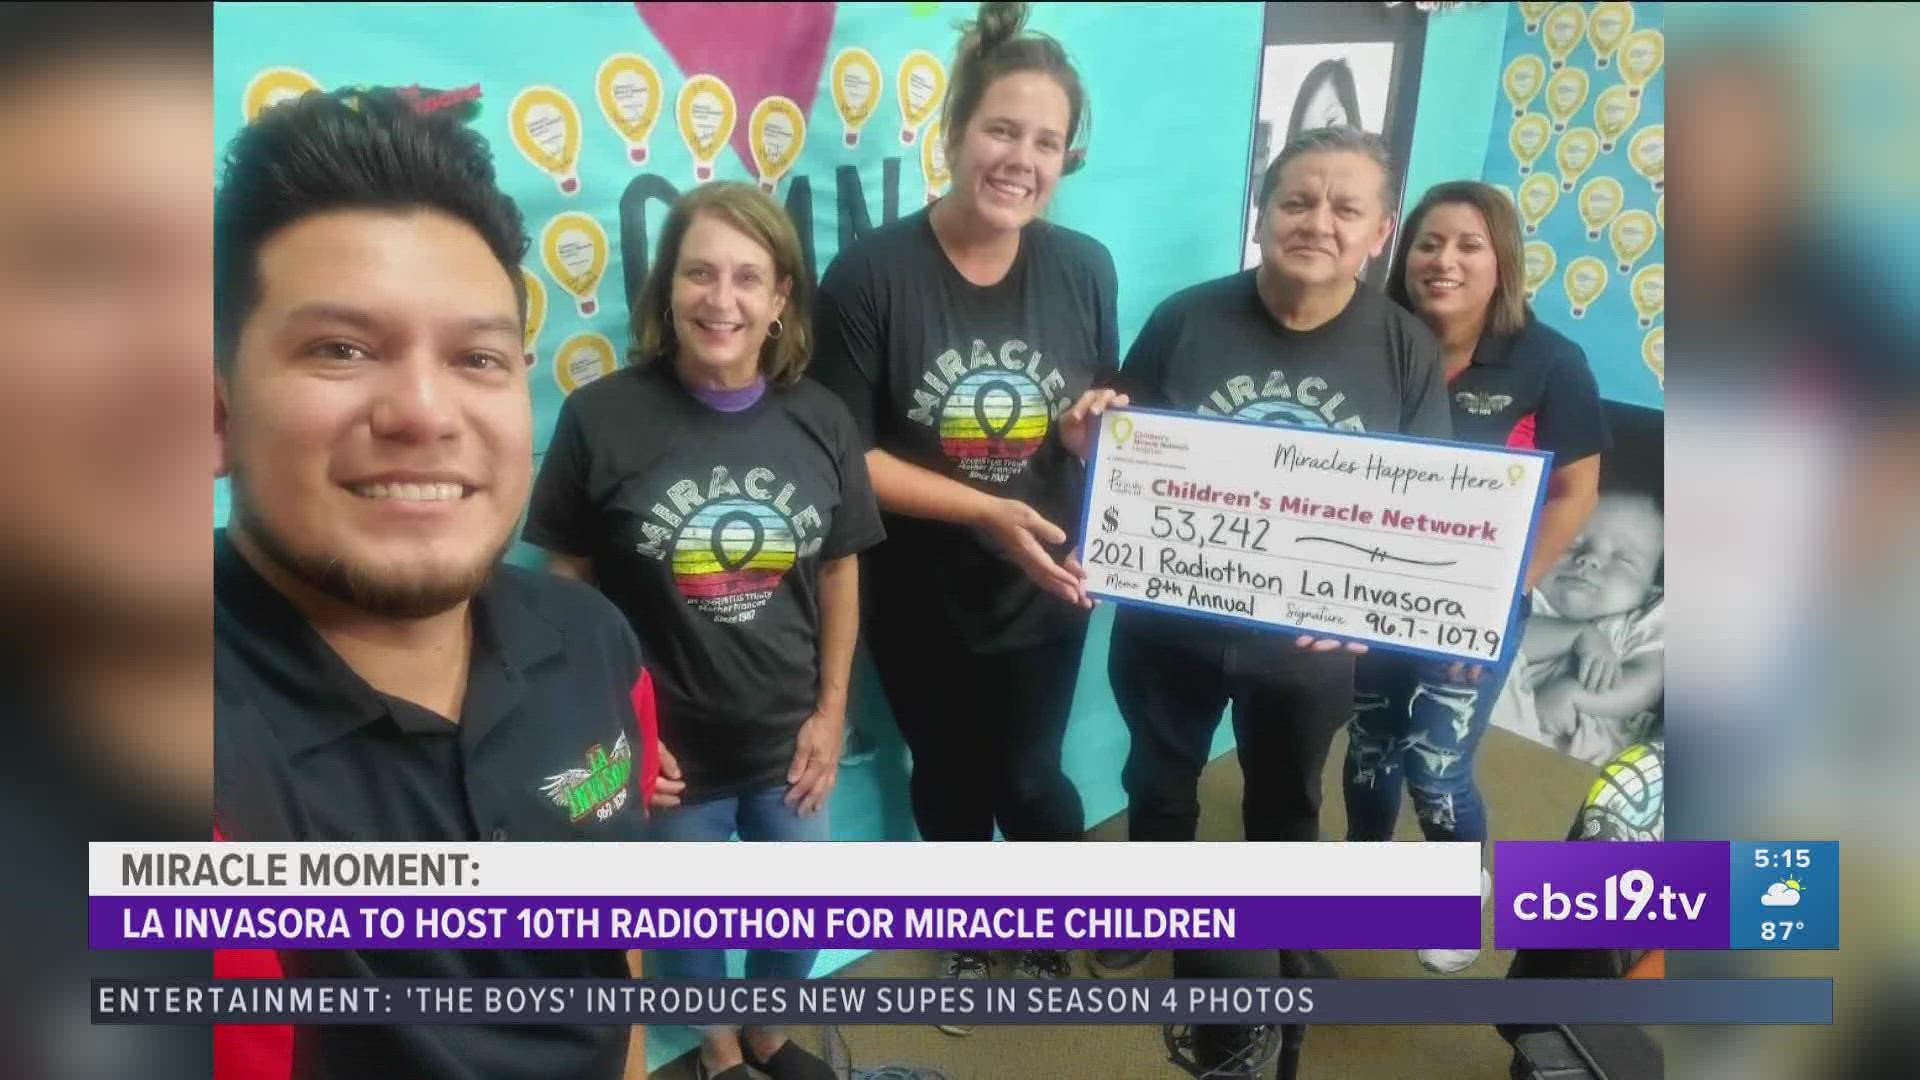 La Invasora hopes to raise their $1 million goal in its 10th year hosting the Radiothon and they are hopeful with the help from the community, they can!